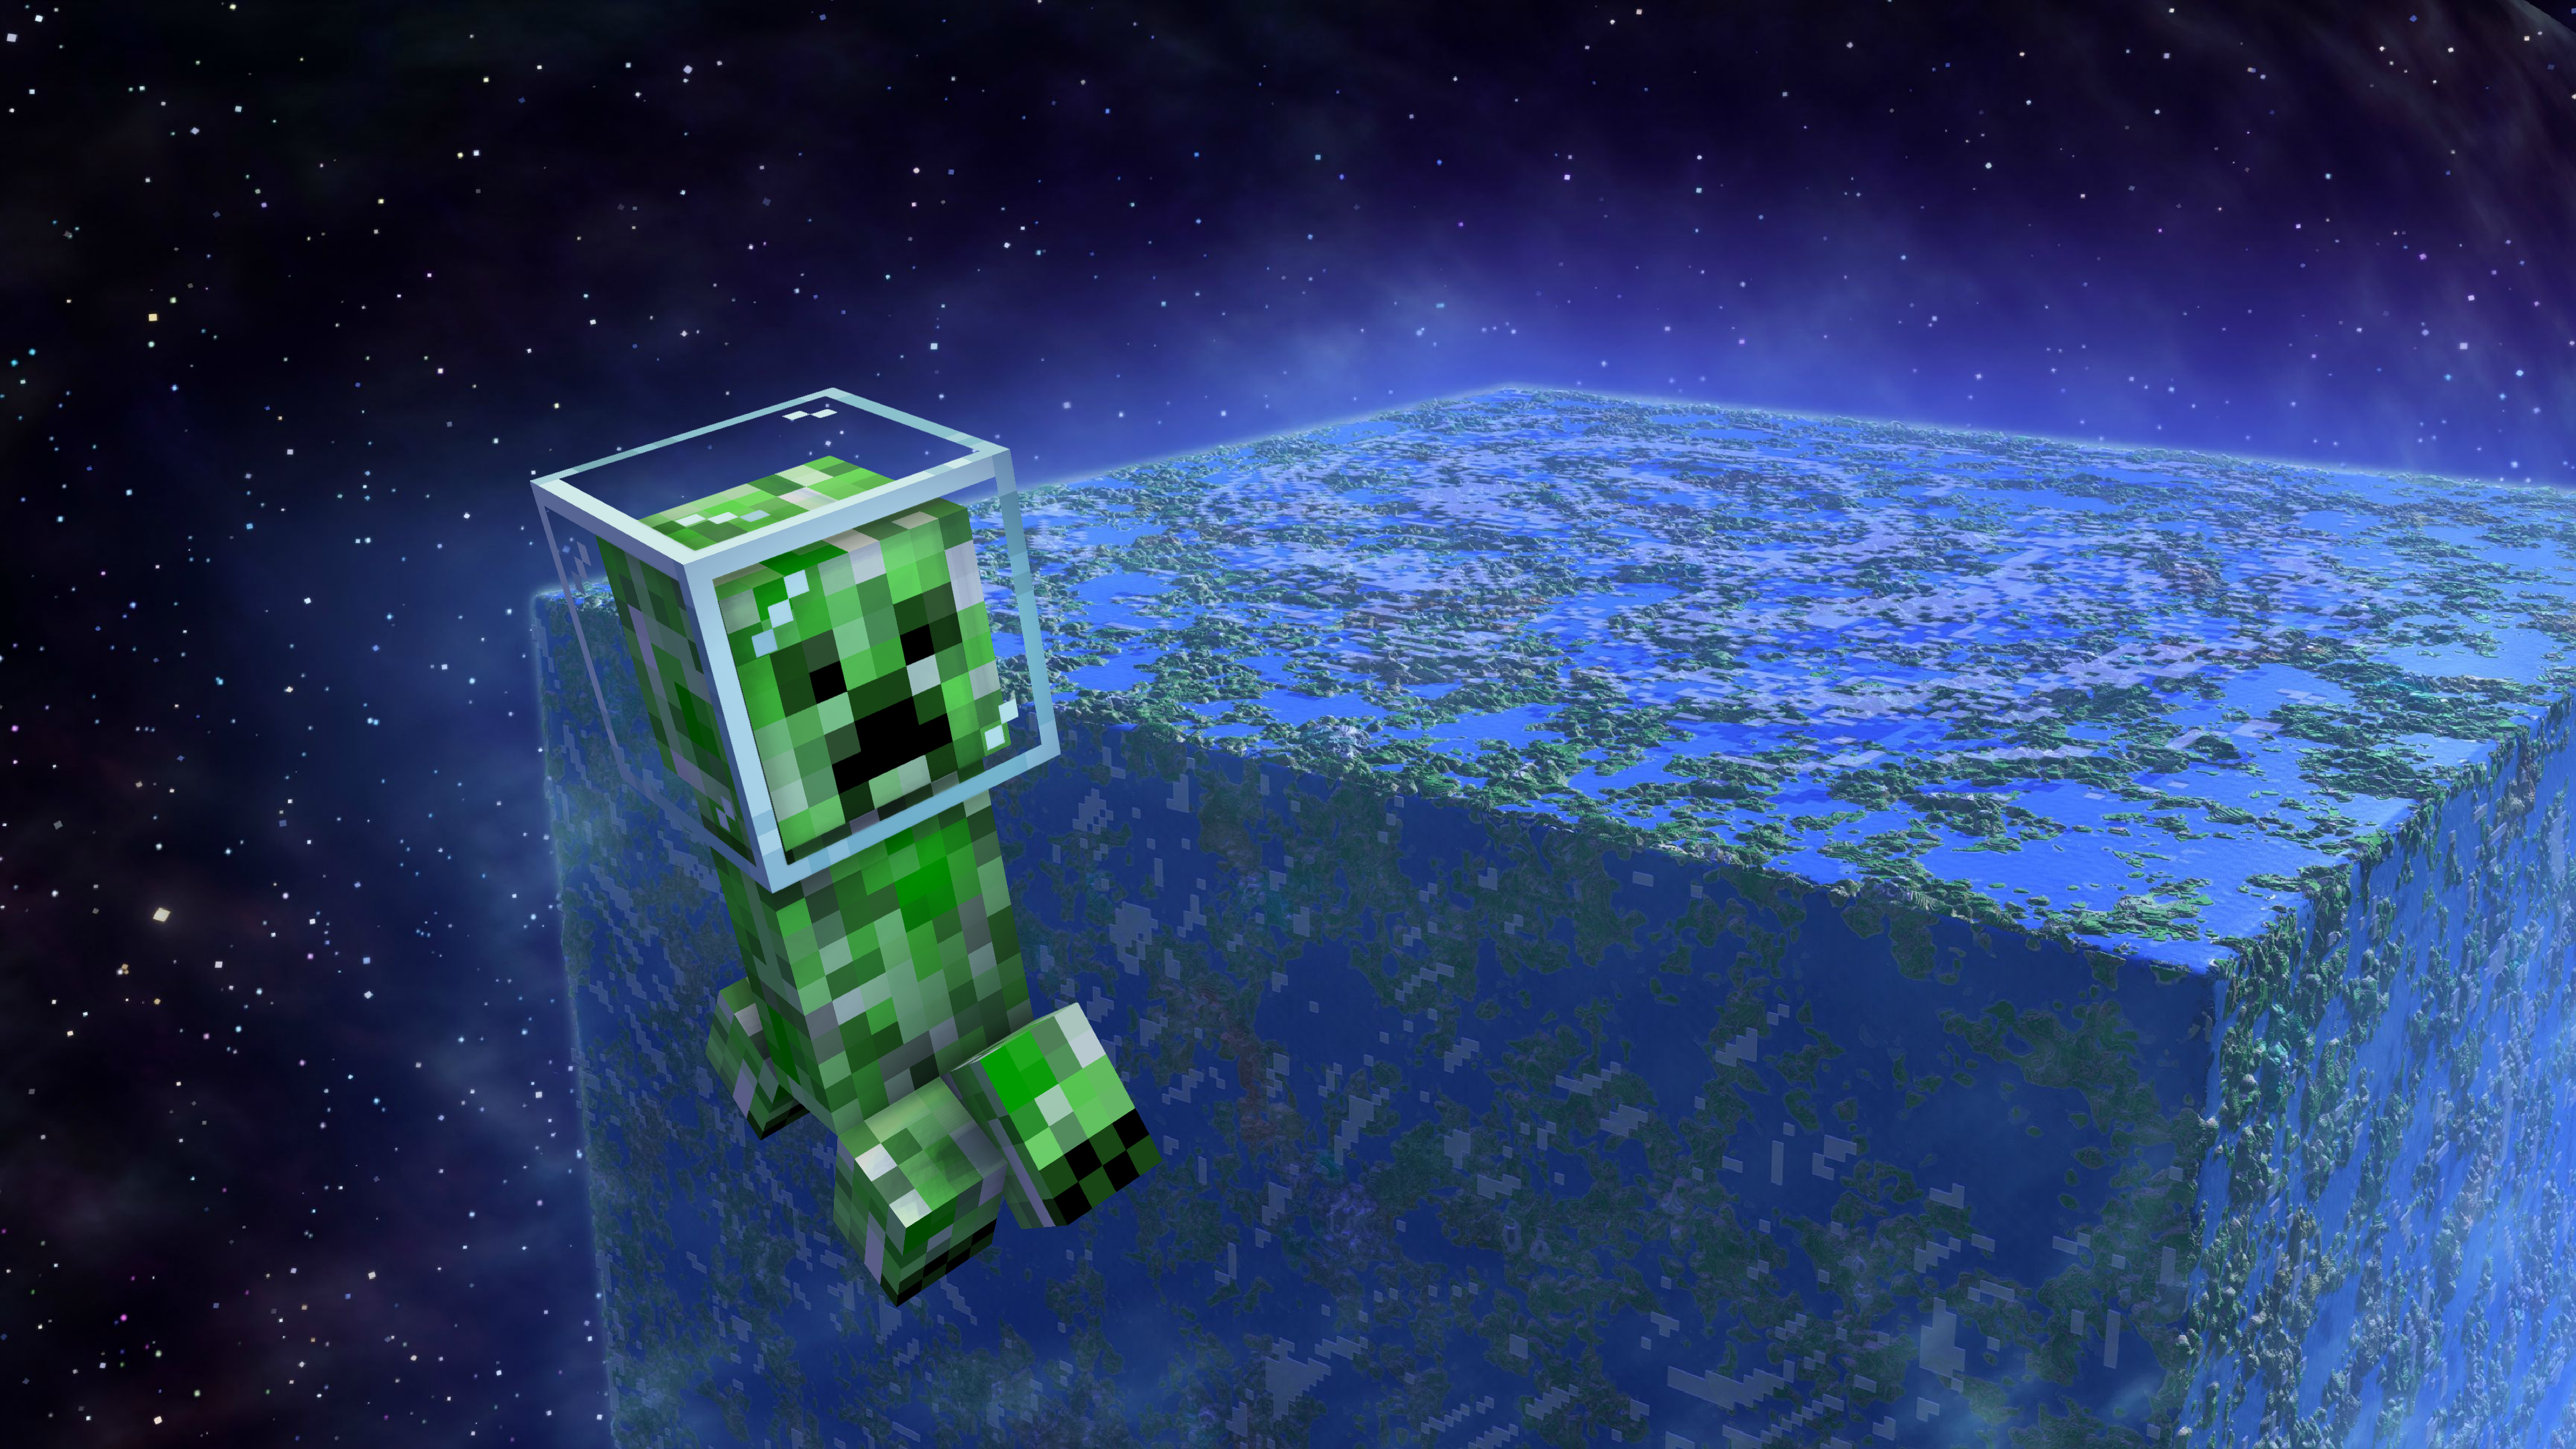 Creeper In space by iNitra